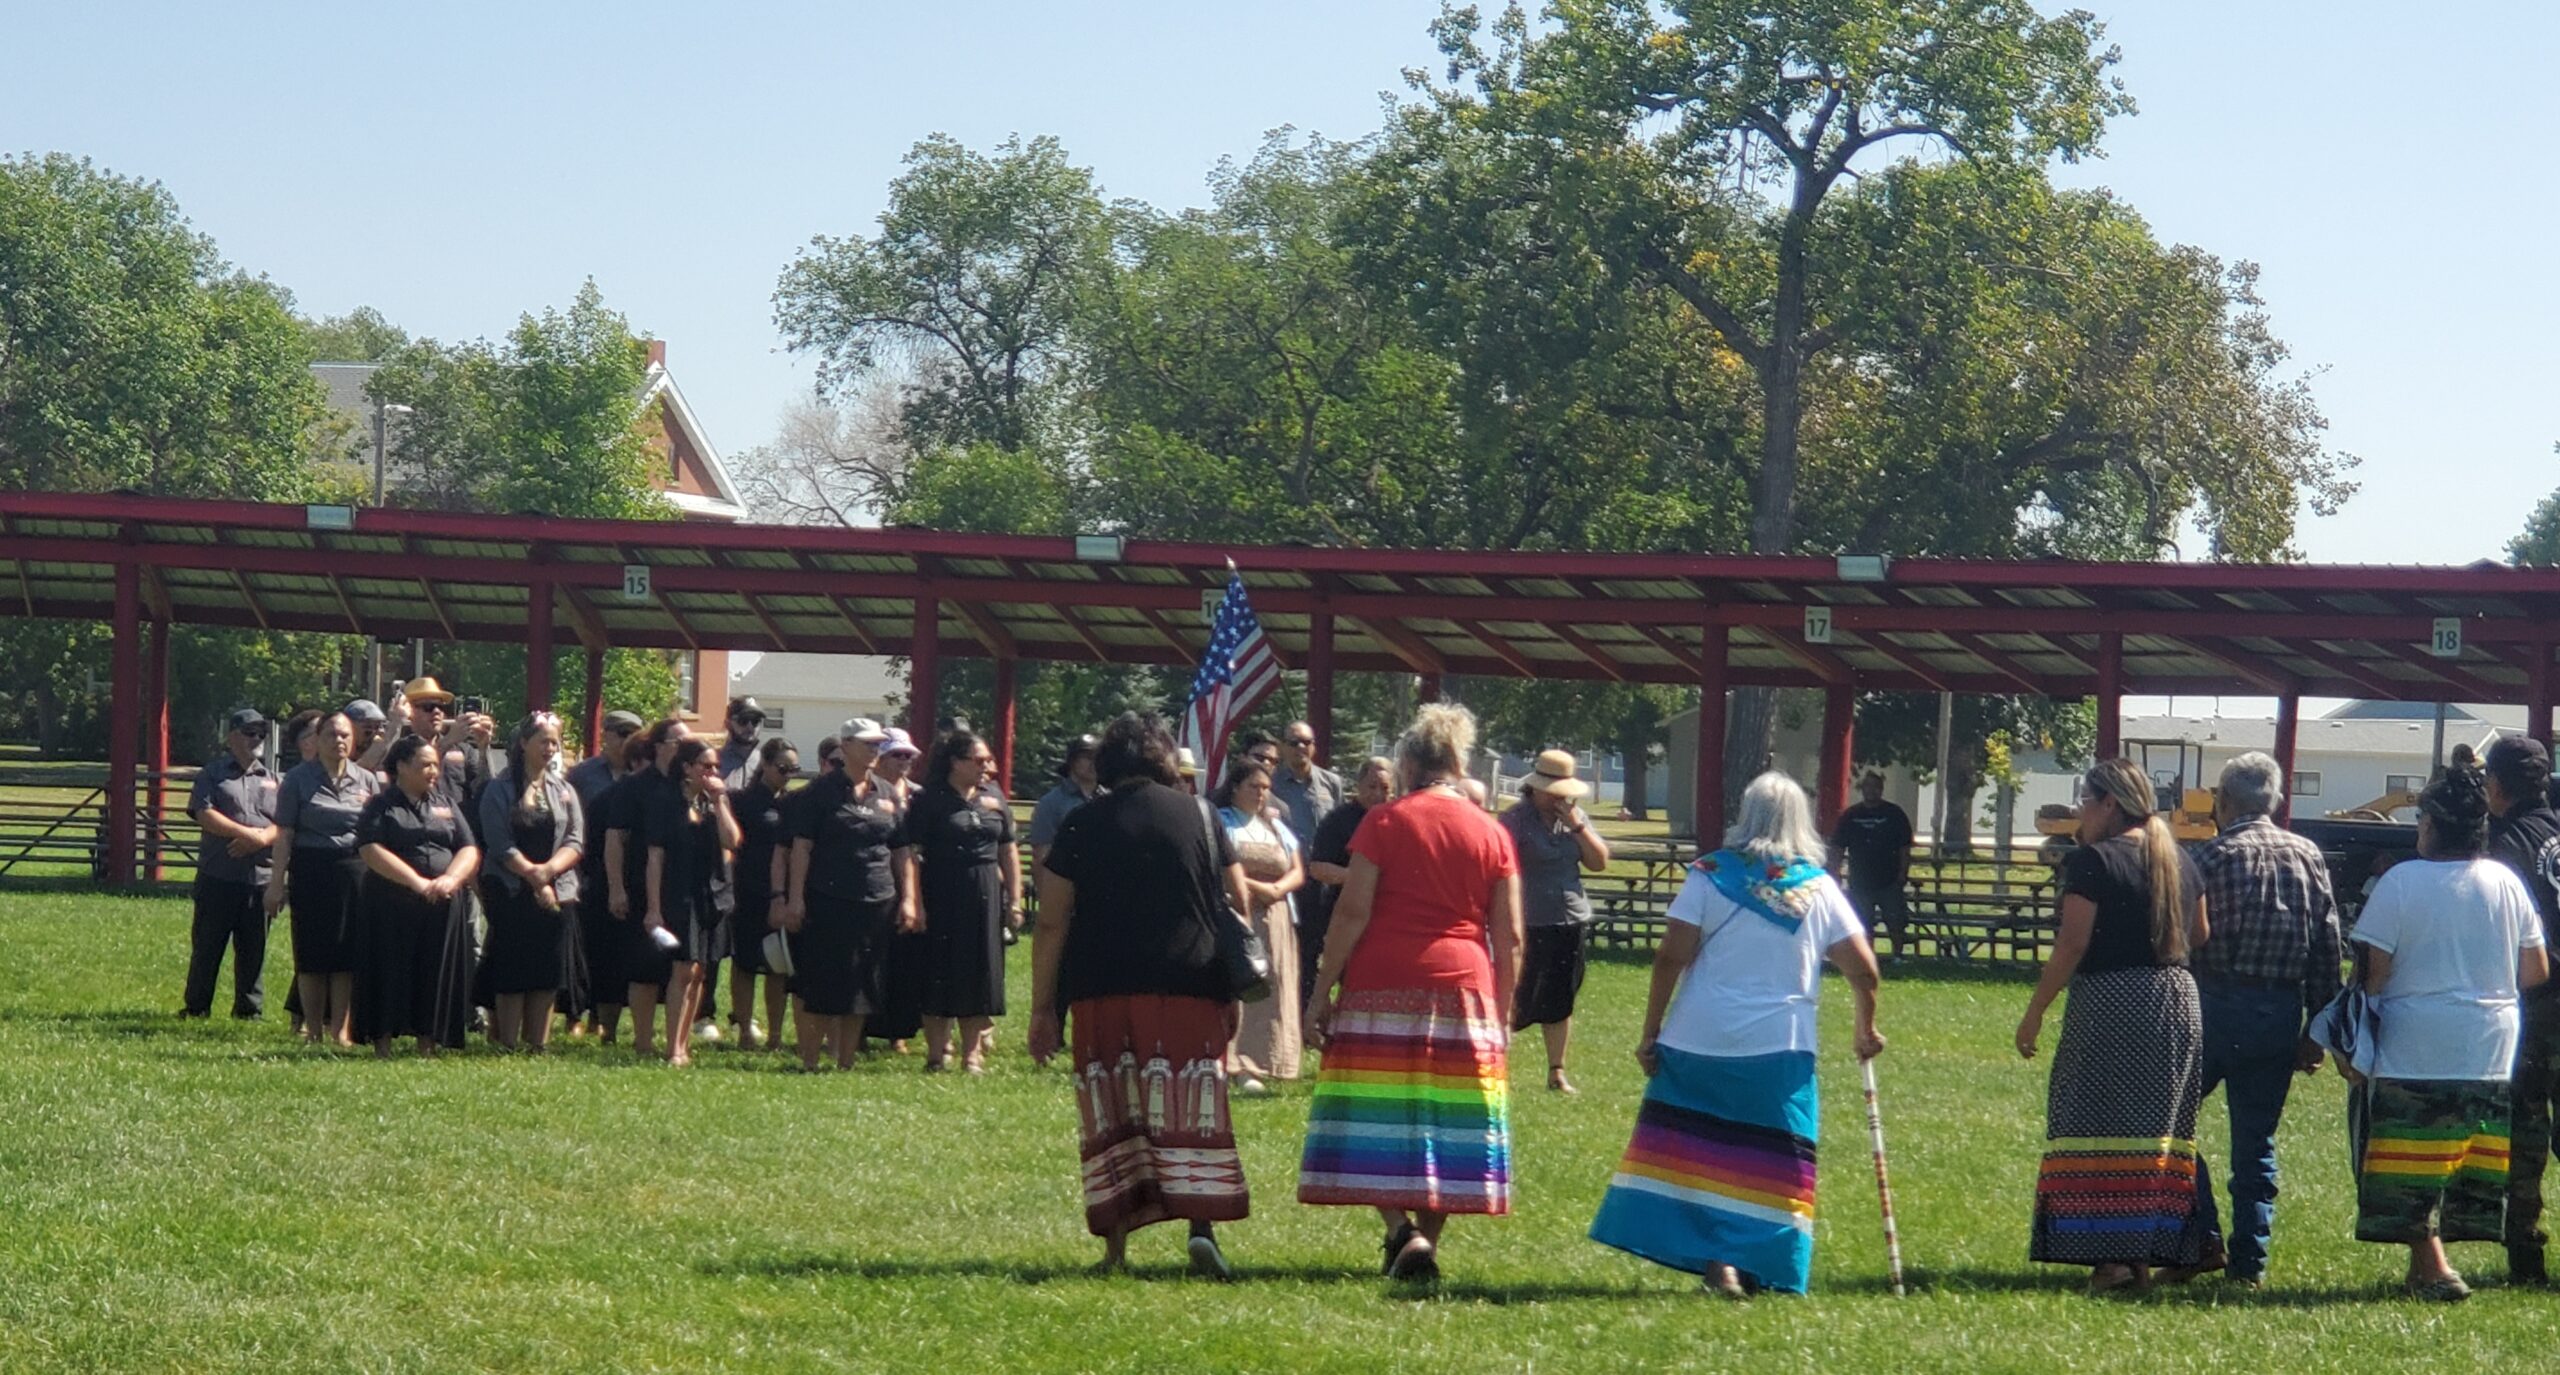 A group of people walk towards another group standing at a distance in an outdoor area. Some of them wearing colorful ribbons skirts, while others are dressed in black.